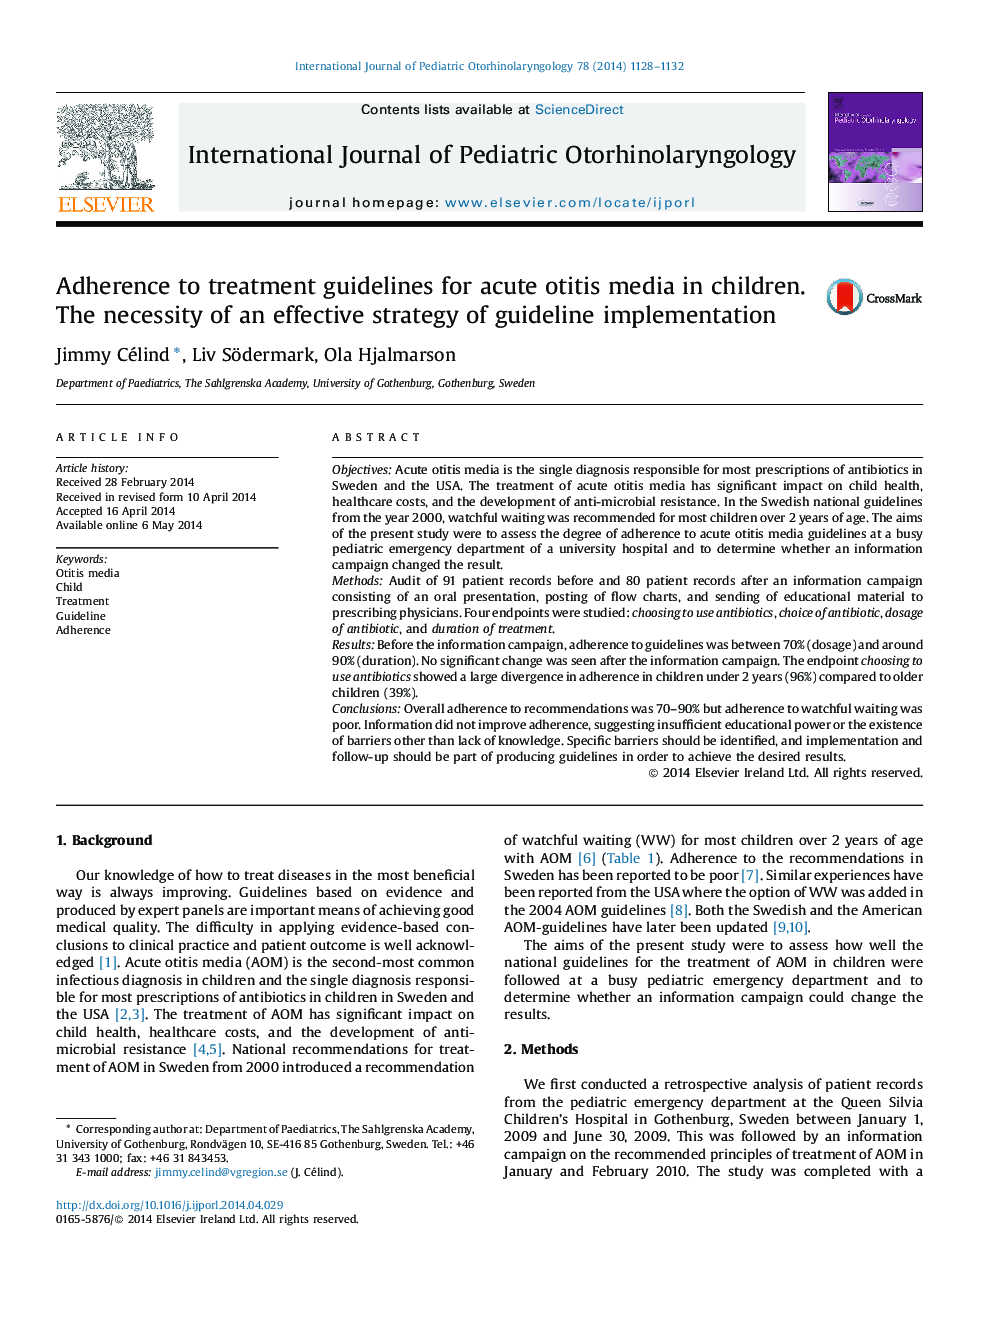 Adherence to treatment guidelines for acute otitis media in children. The necessity of an effective strategy of guideline implementation